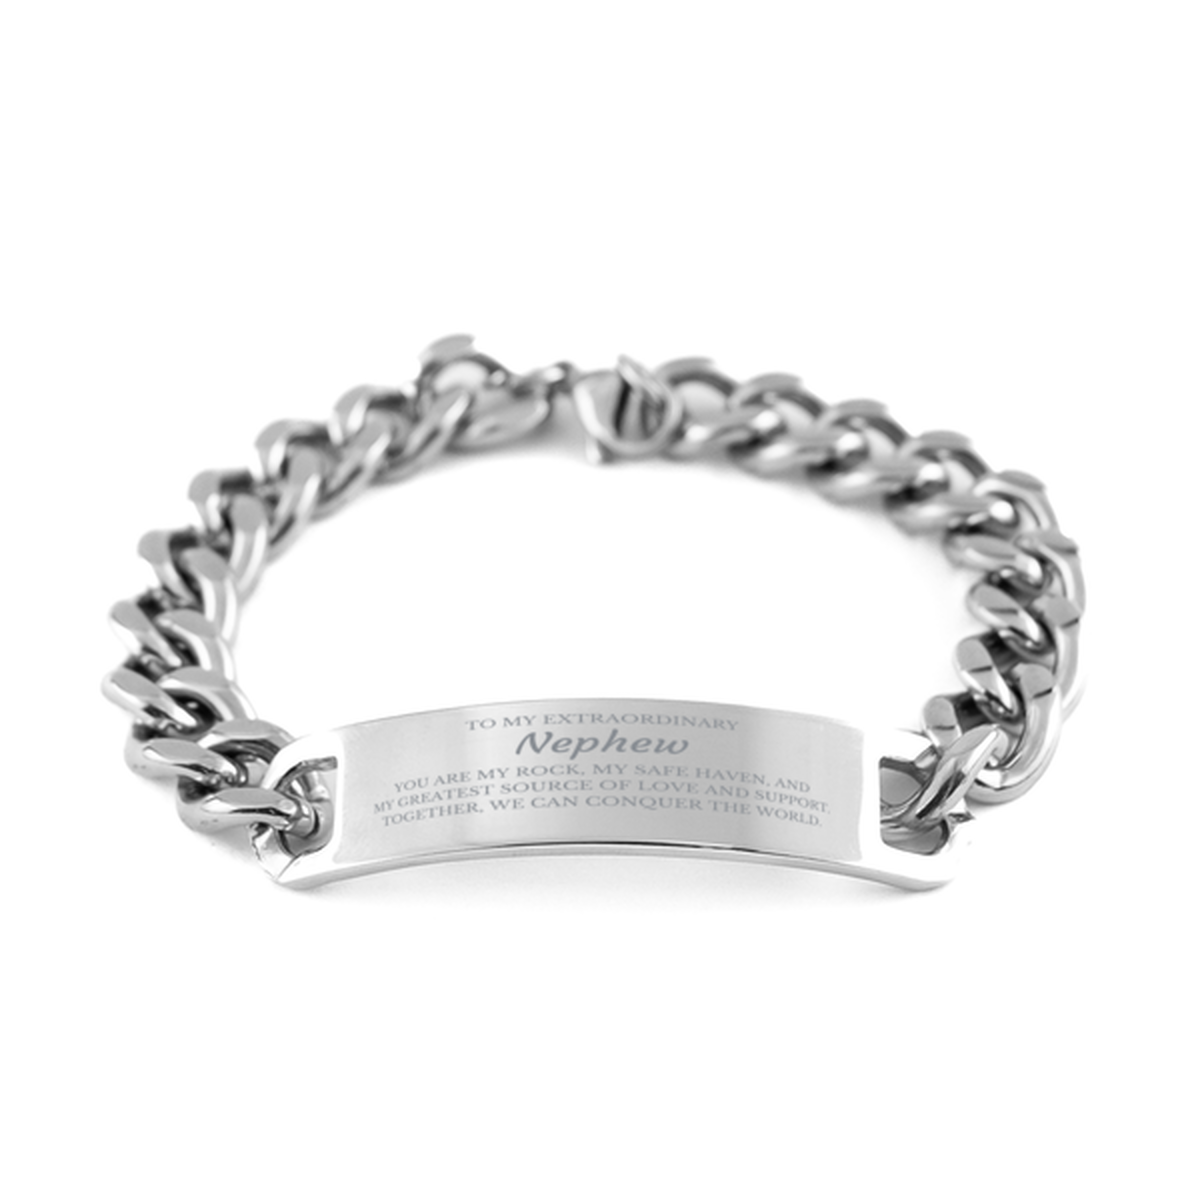 To My Extraordinary Nephew Gifts, Together, we can conquer the world, Birthday Cuban Chain Stainless Steel Bracelet For Nephew, Christmas Gifts For Nephew